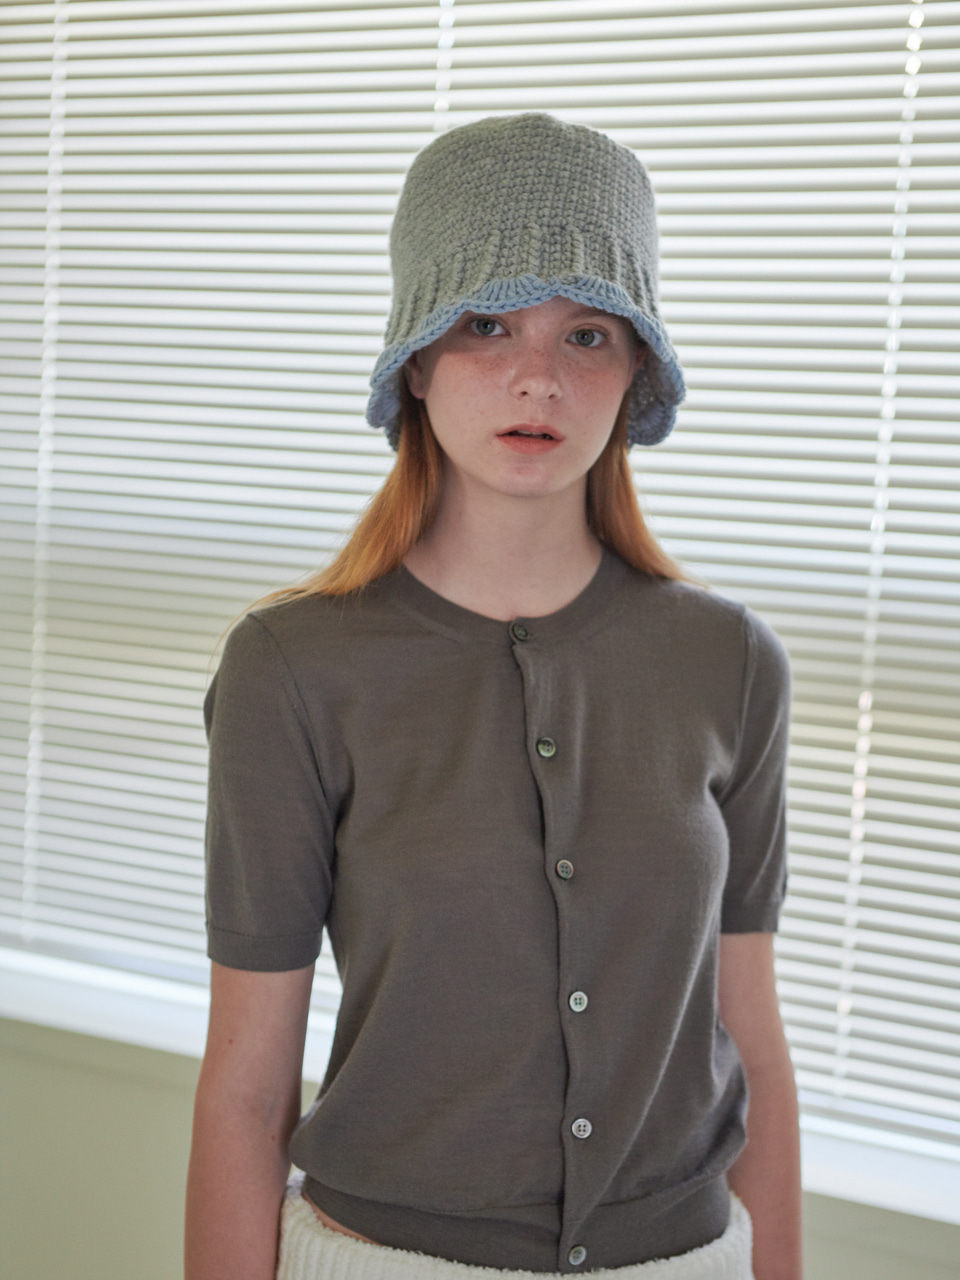 Flower bell hat (grey and blue)